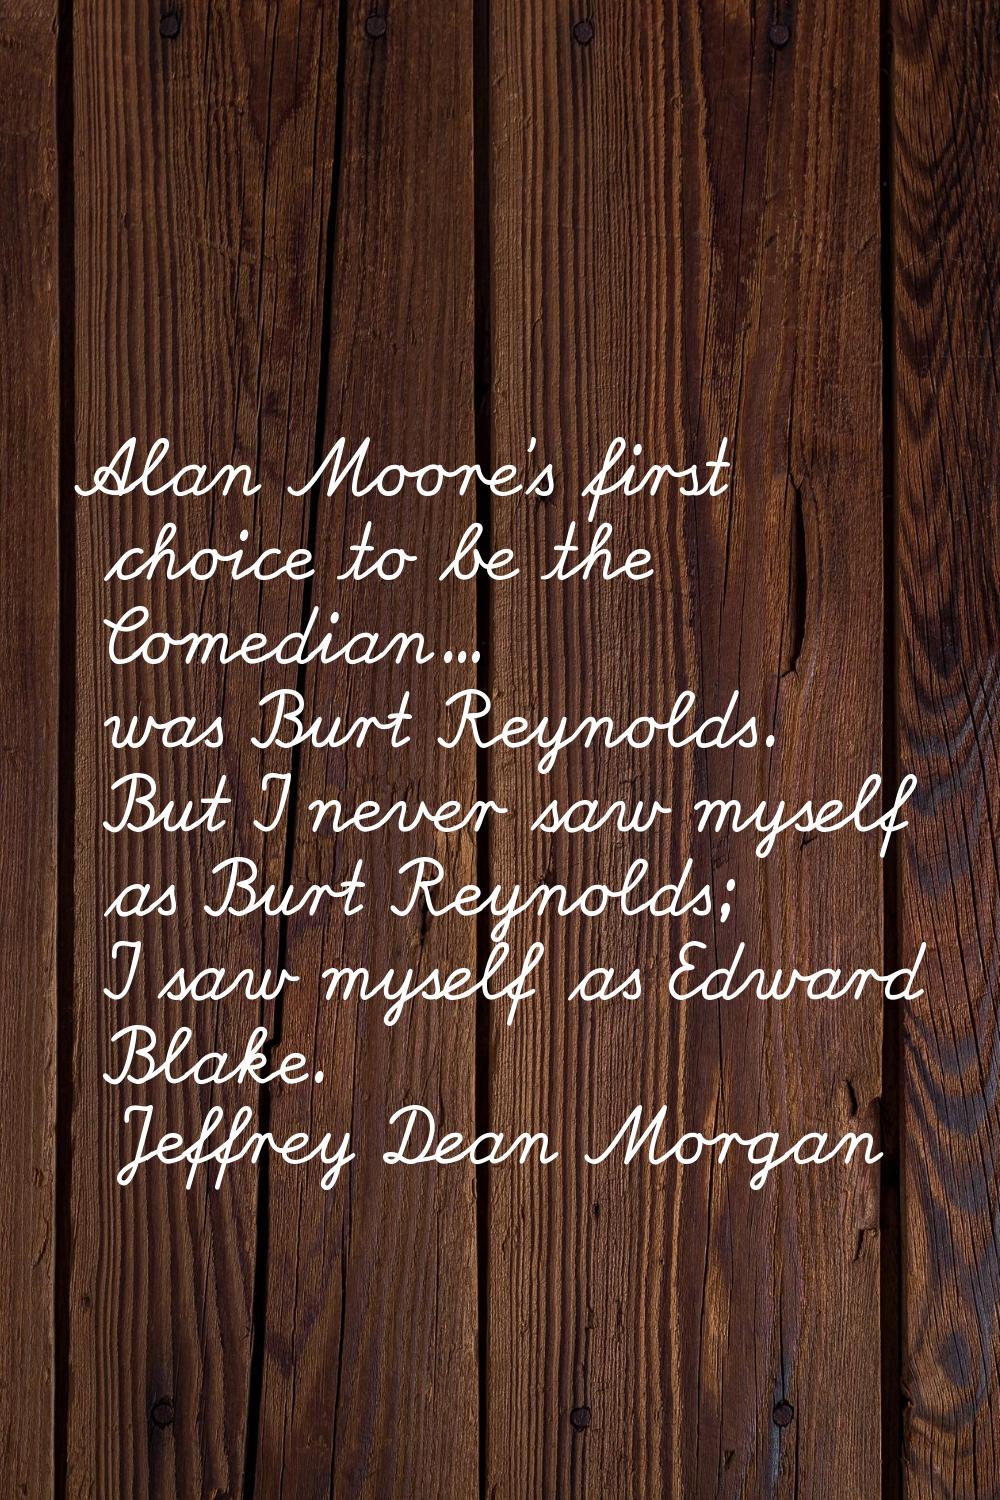 Alan Moore's first choice to be the Comedian... was Burt Reynolds. But I never saw myself as Burt R